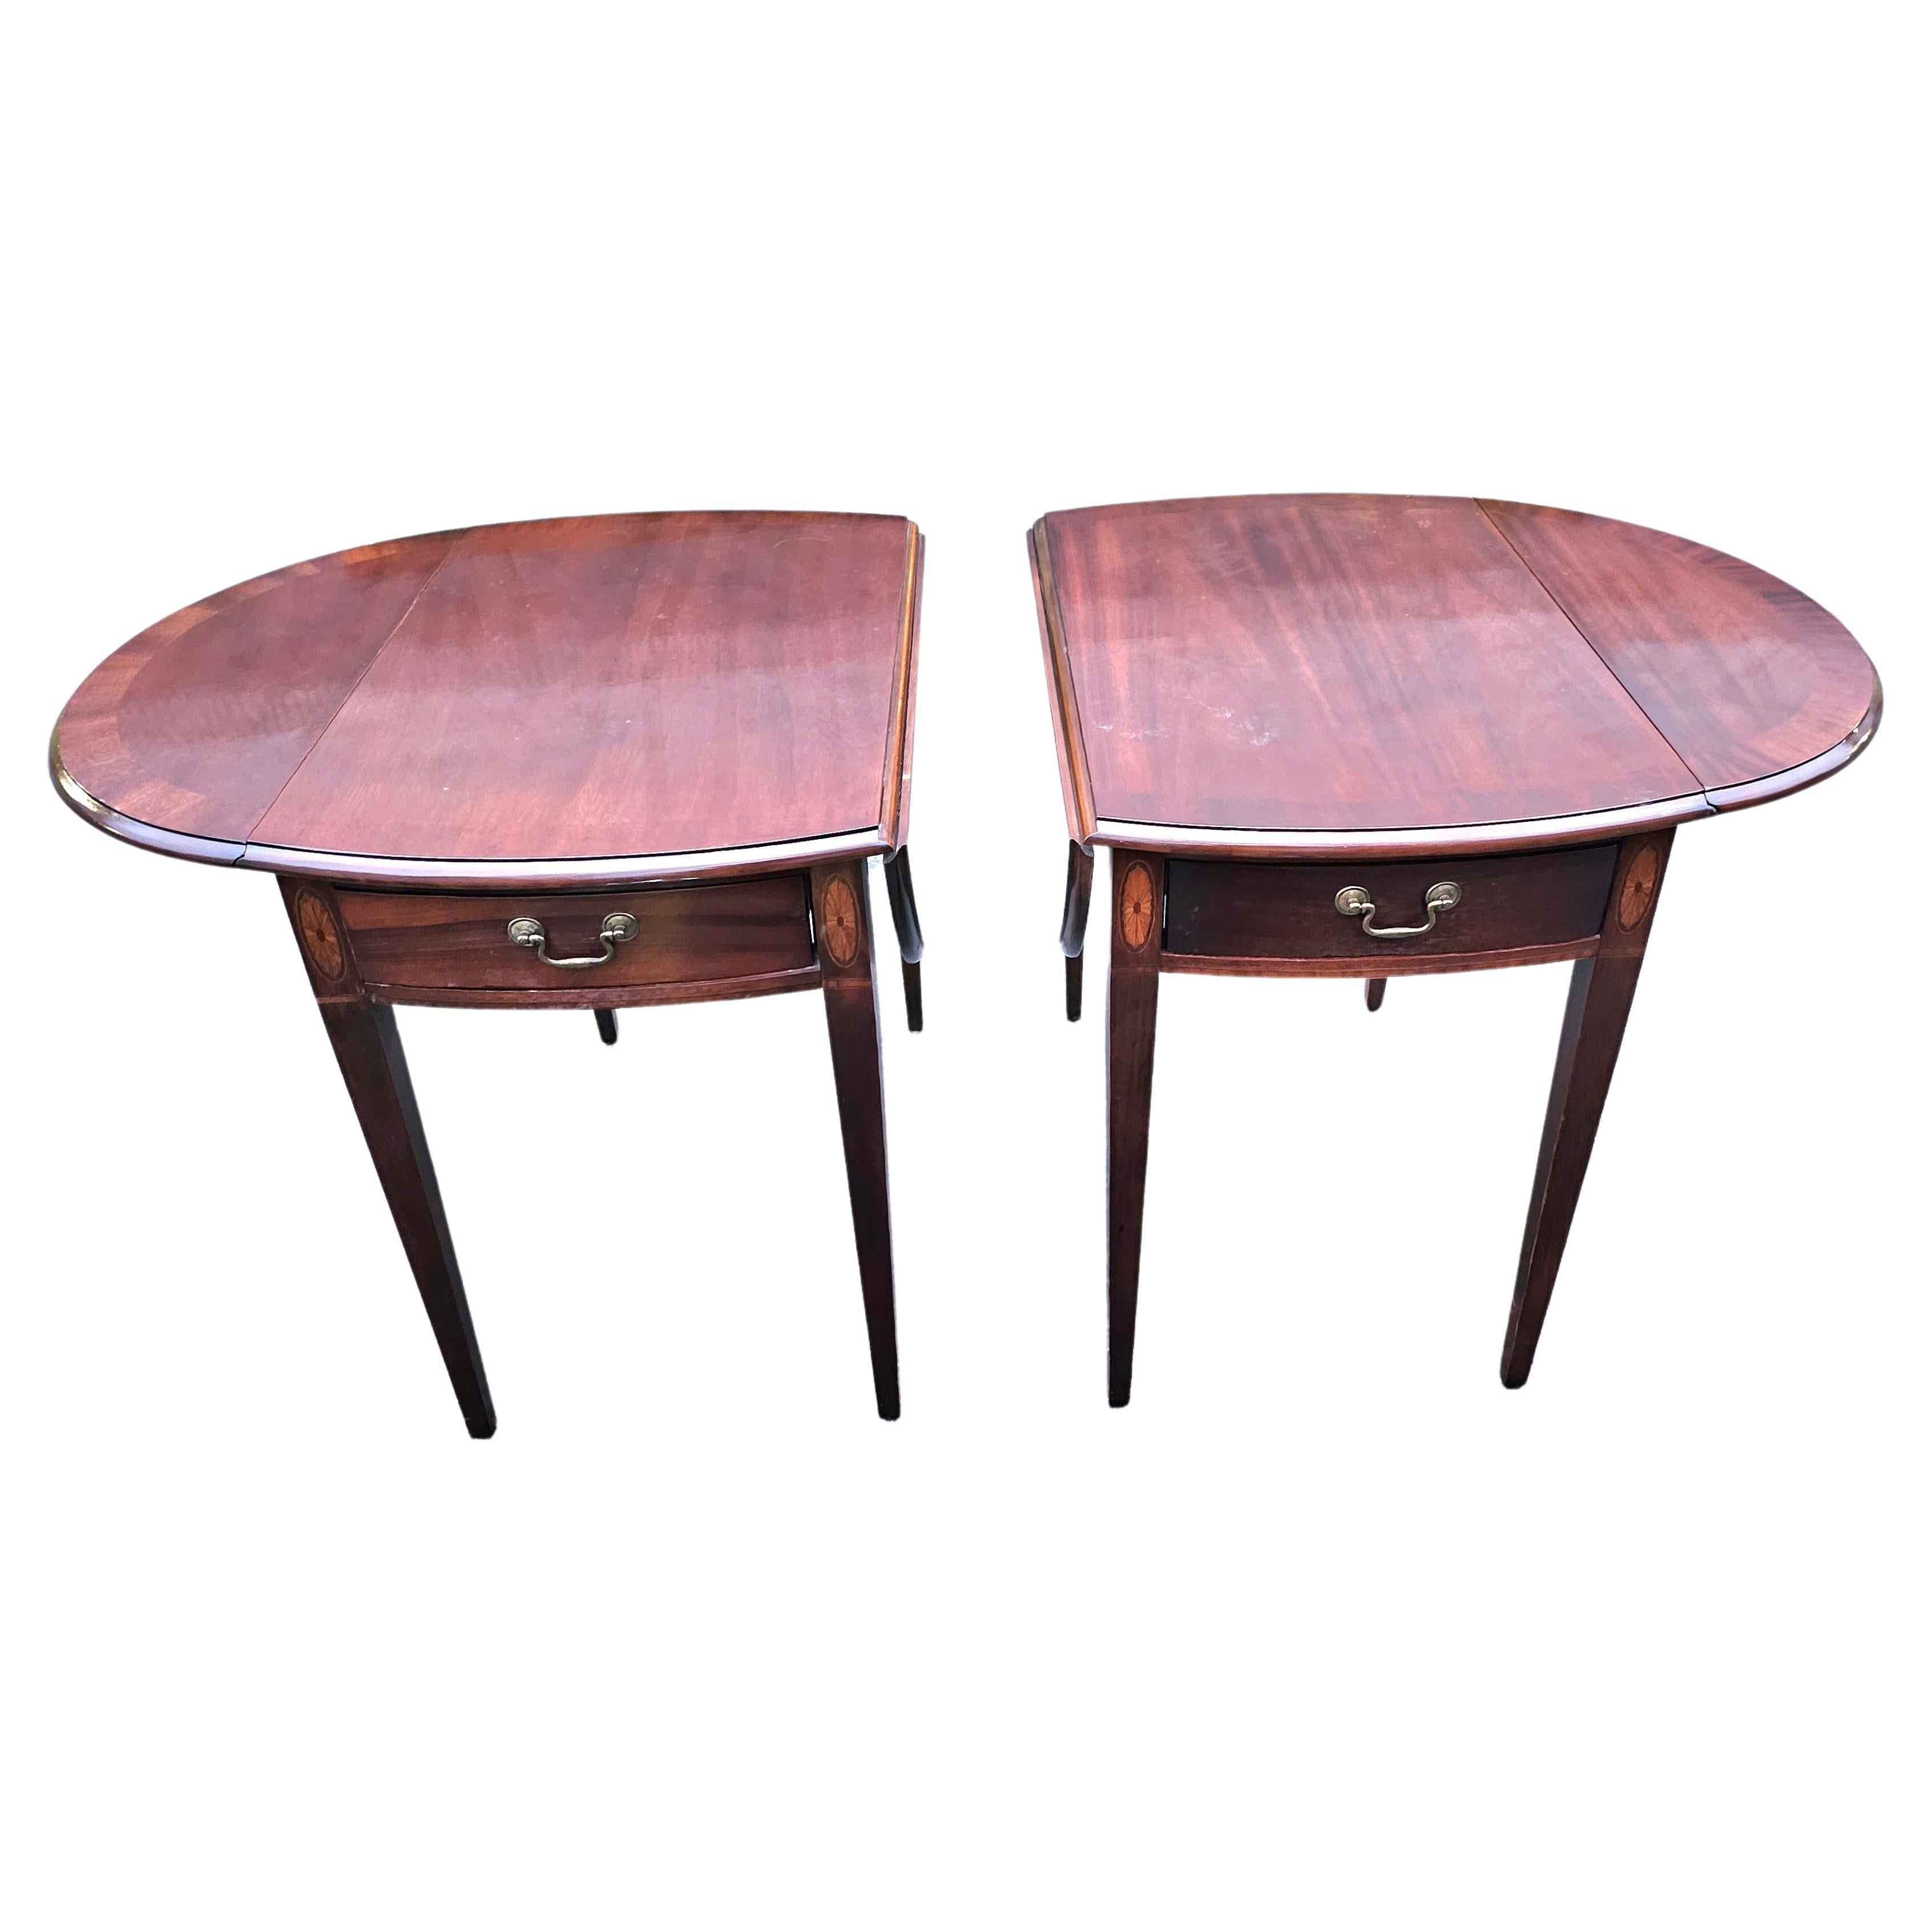 Pair of Magogany Banded and Satinwood Inlaid Pembroke Drop-Leaf Side Tables 1